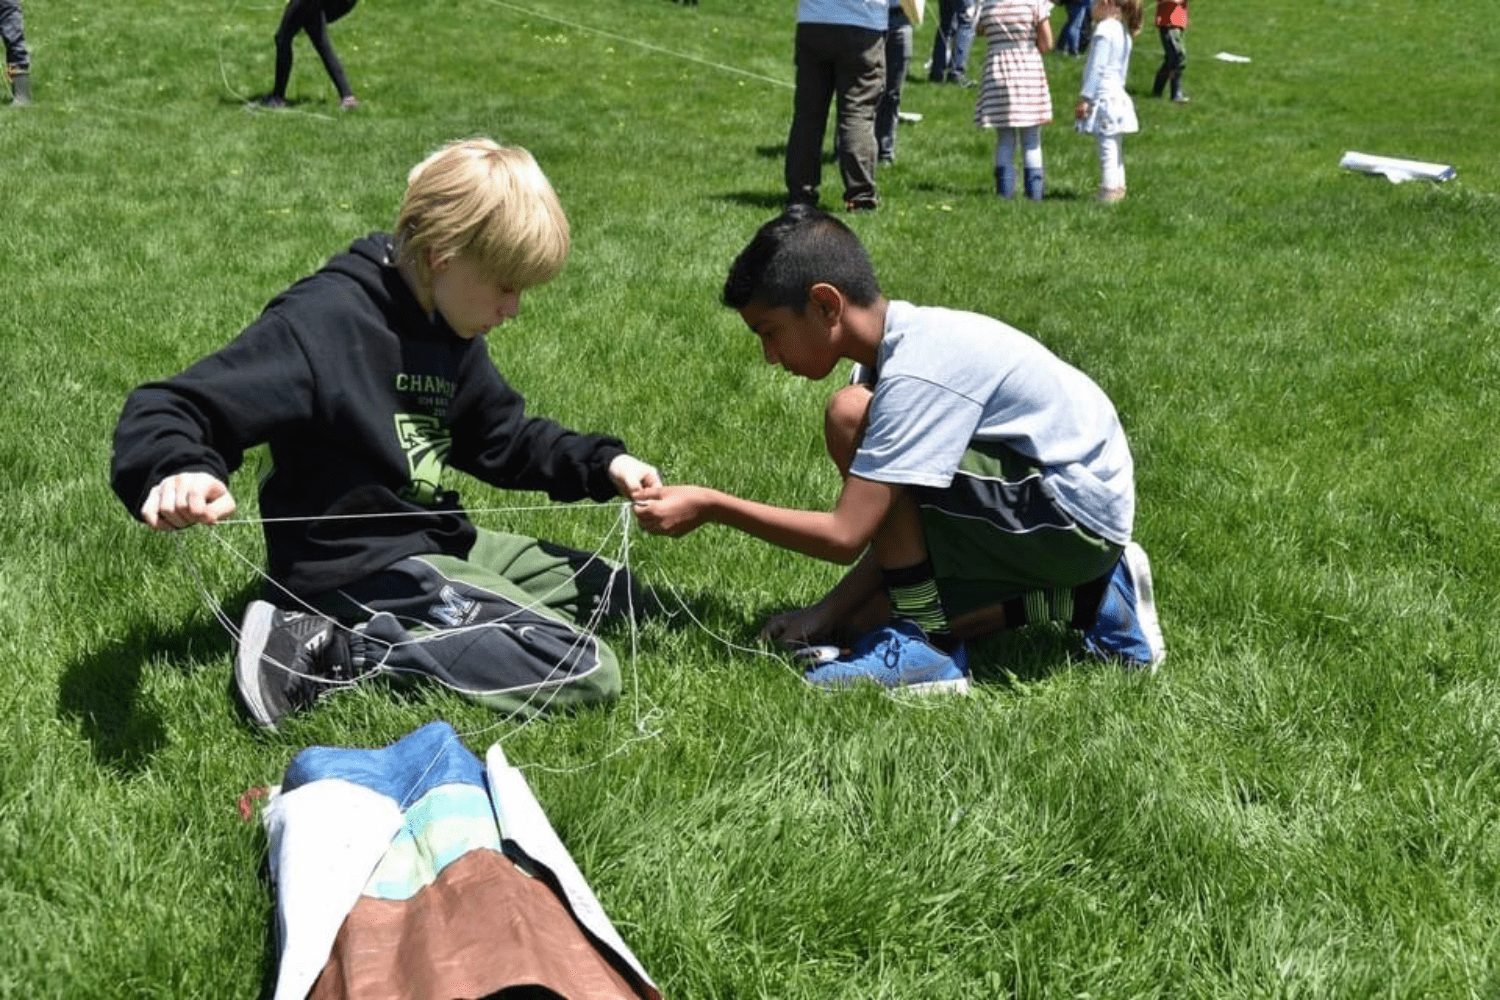 Two children on the grass untangling kite lines.